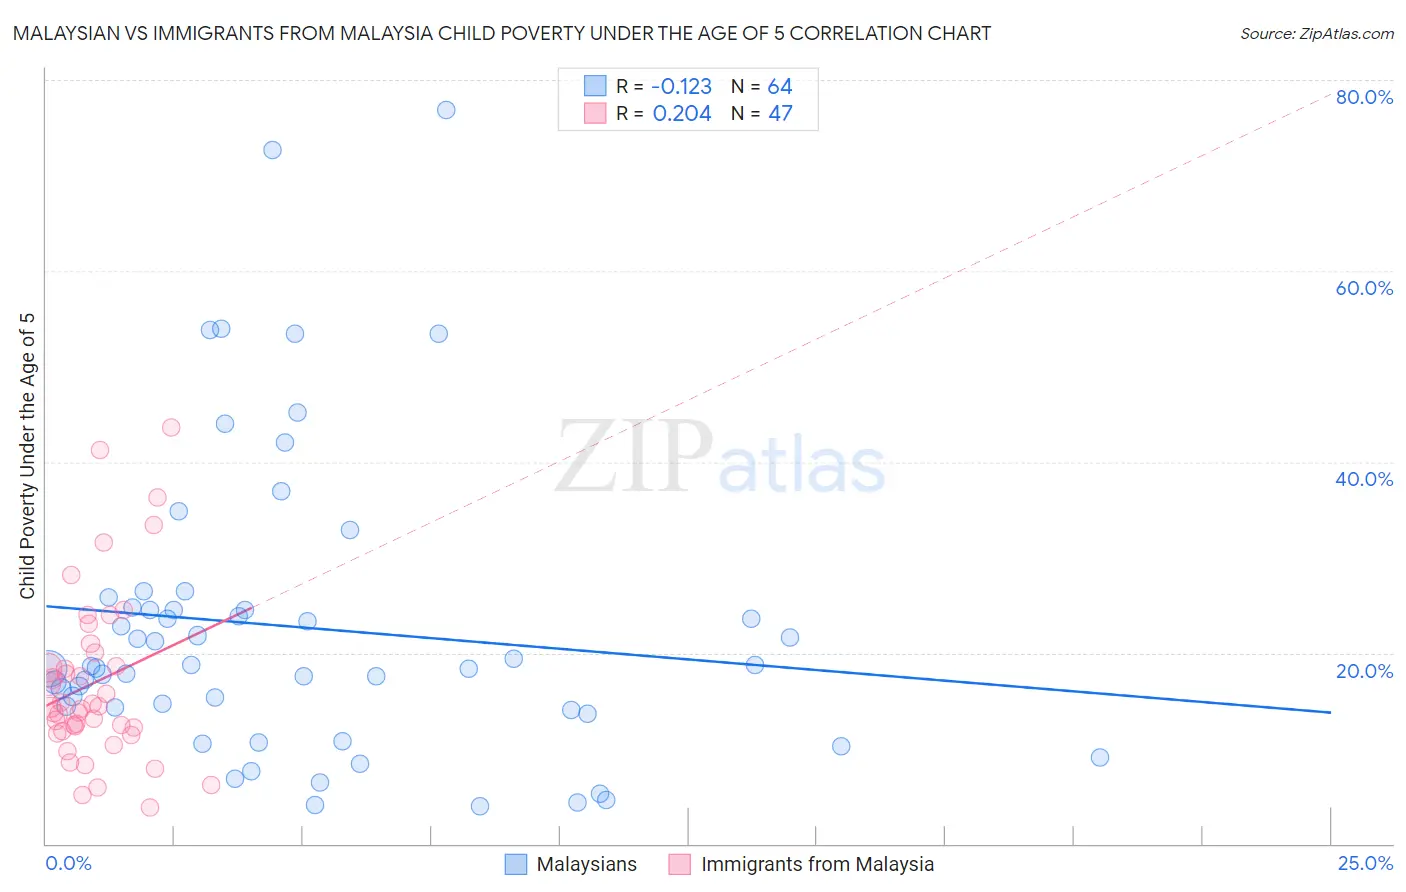 Malaysian vs Immigrants from Malaysia Child Poverty Under the Age of 5